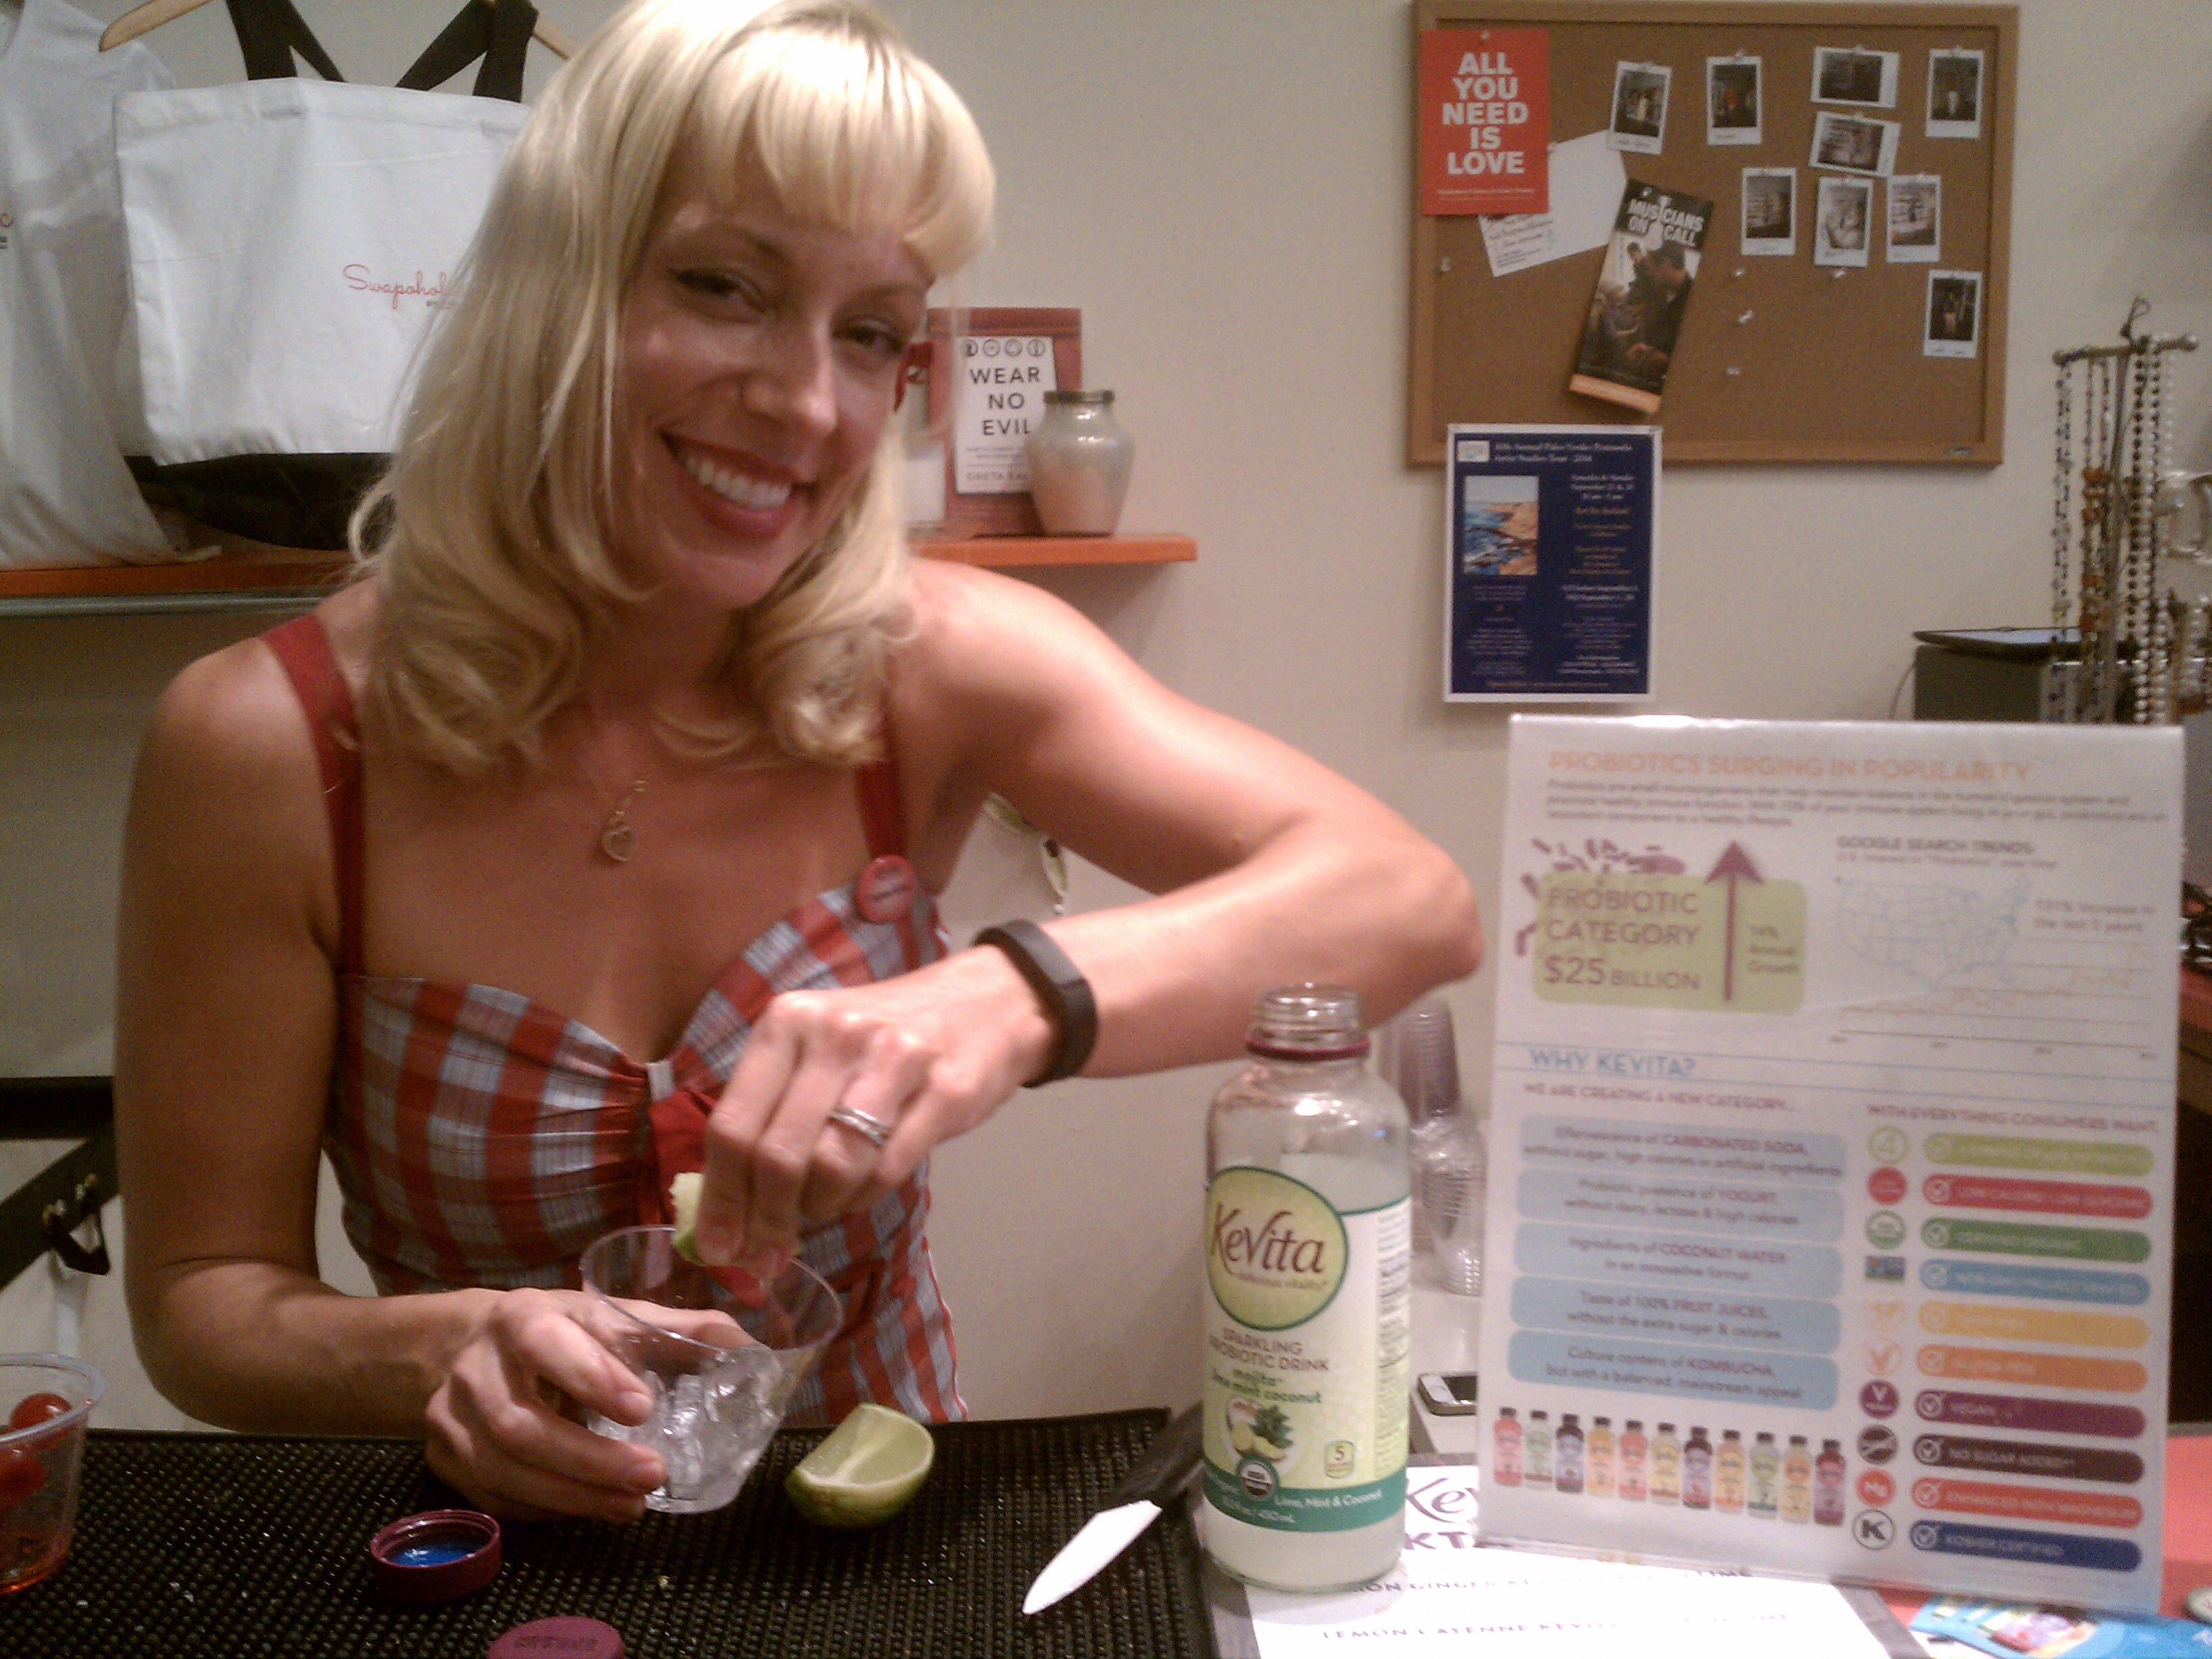 Amber from Kevita mixes up a refreshing Mojito Lime Mint Coconut drink